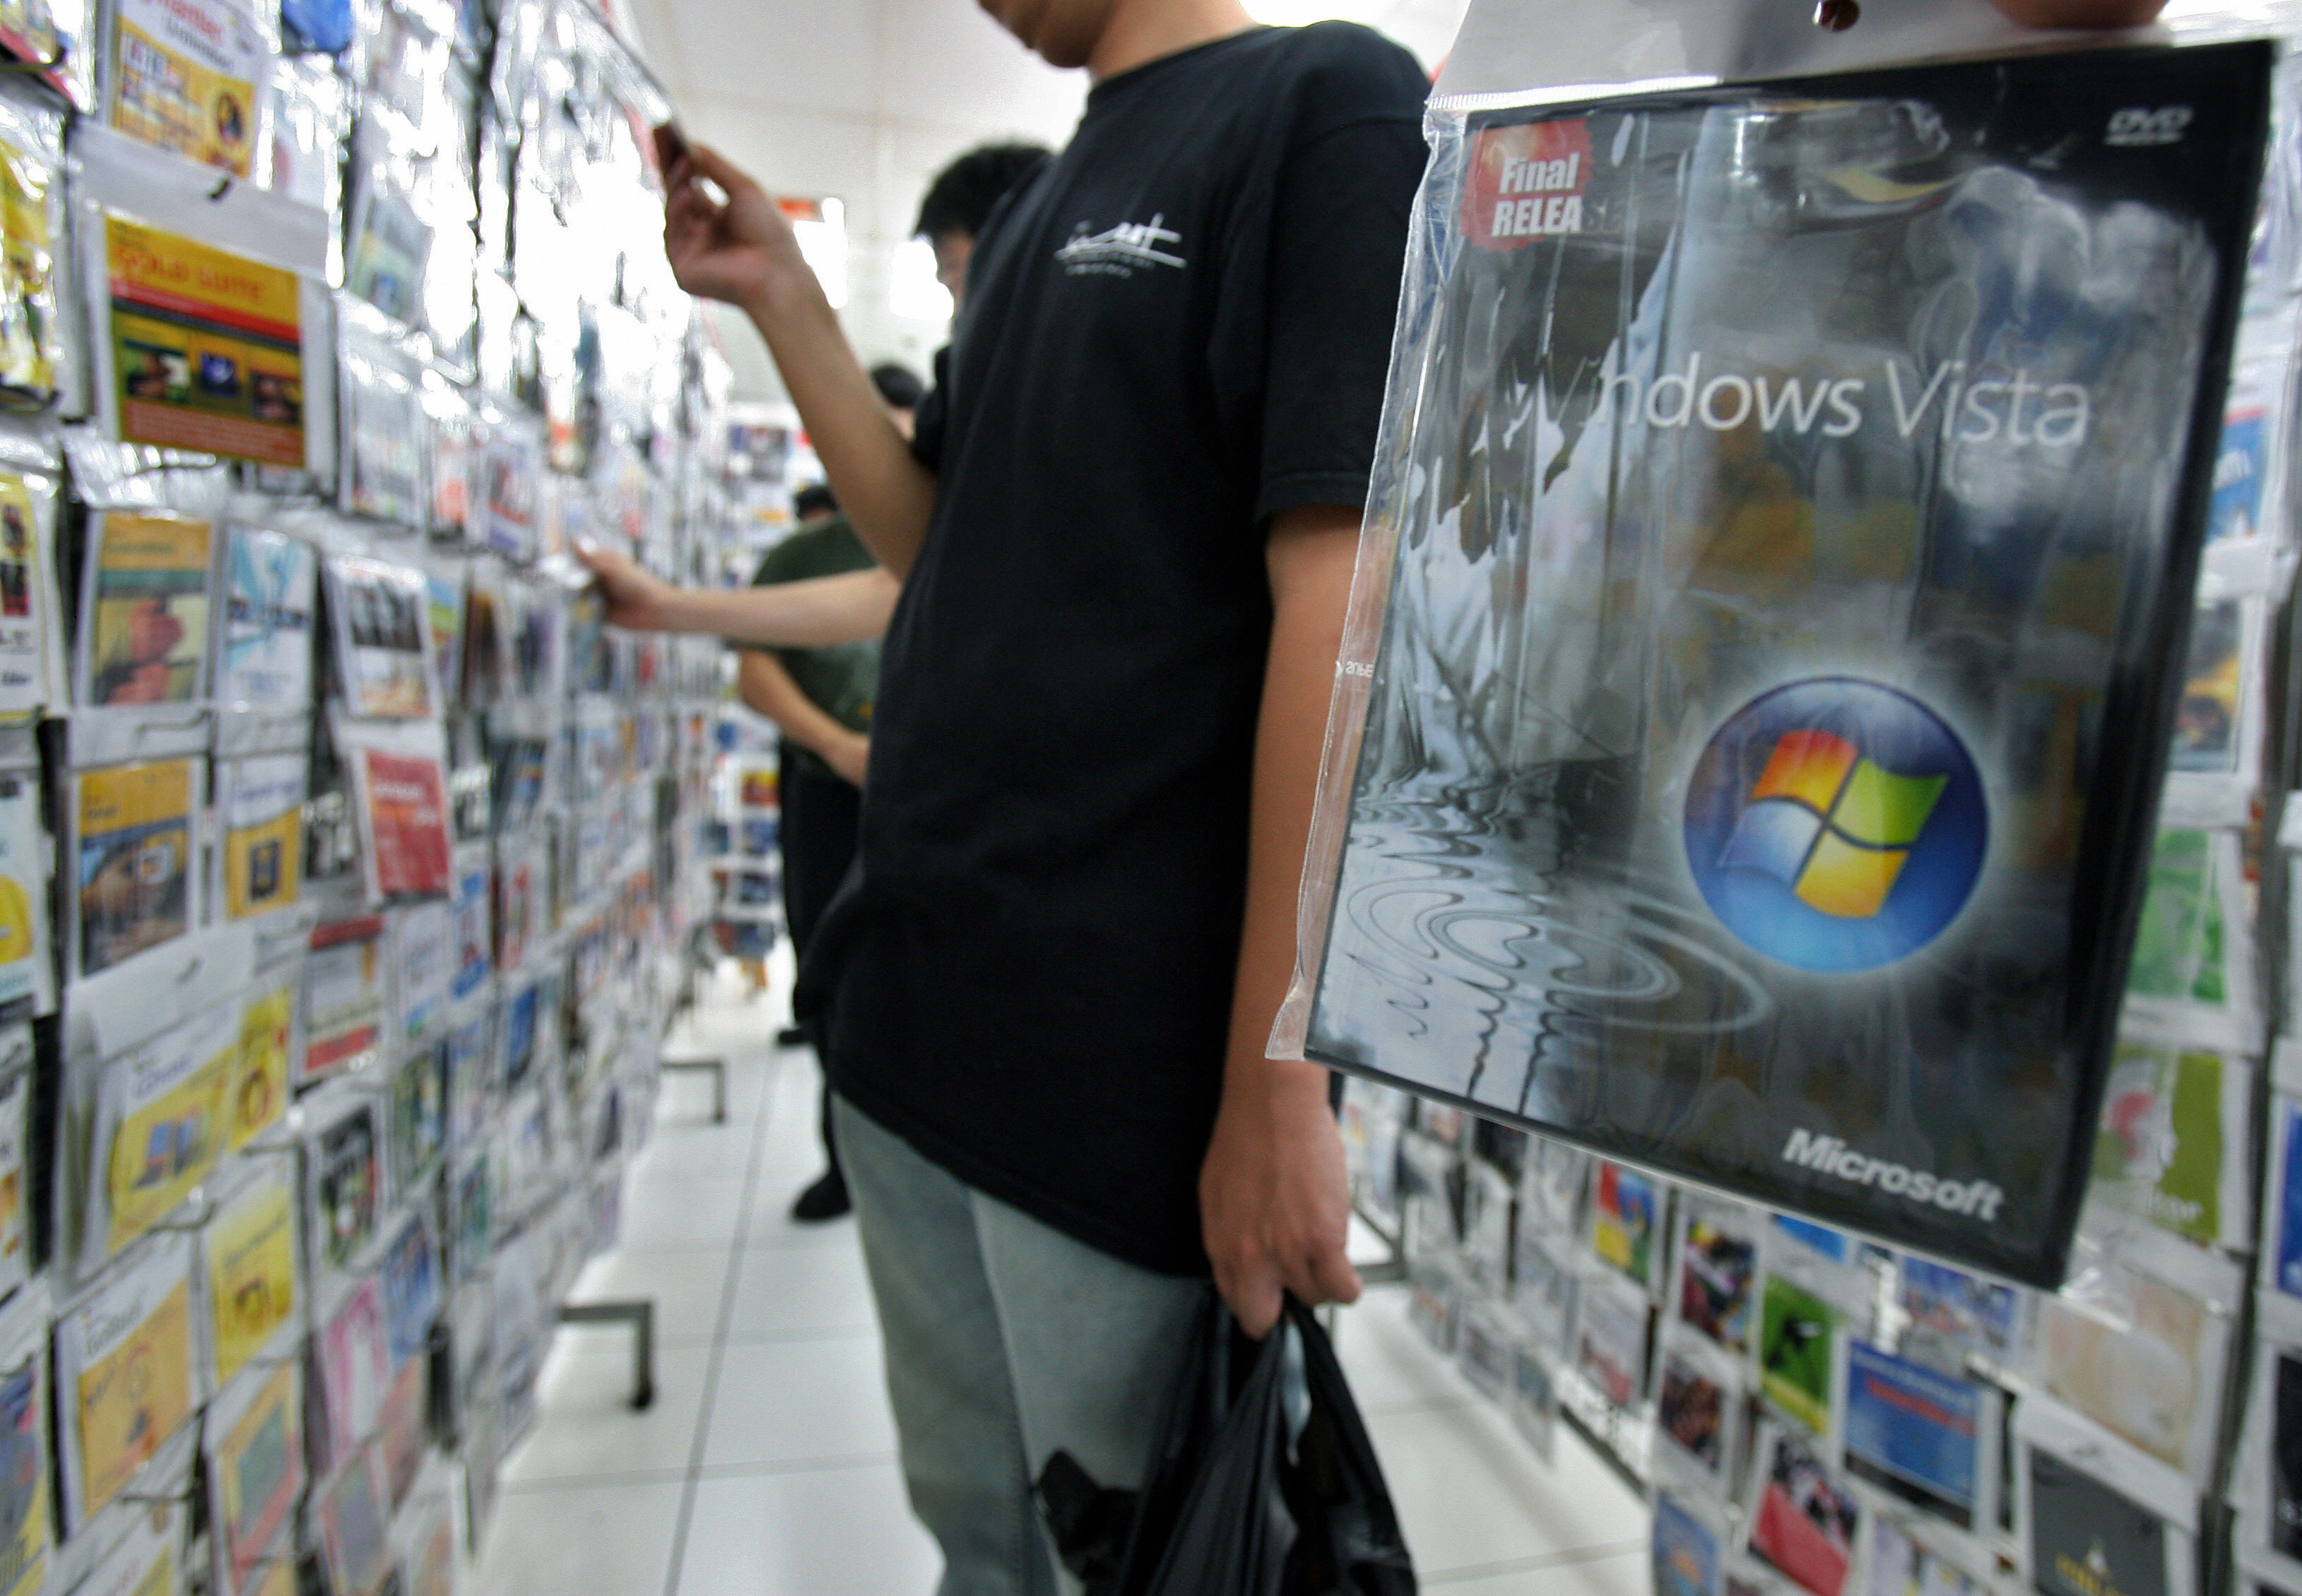 A man buys a pirated copy of Microsoft's